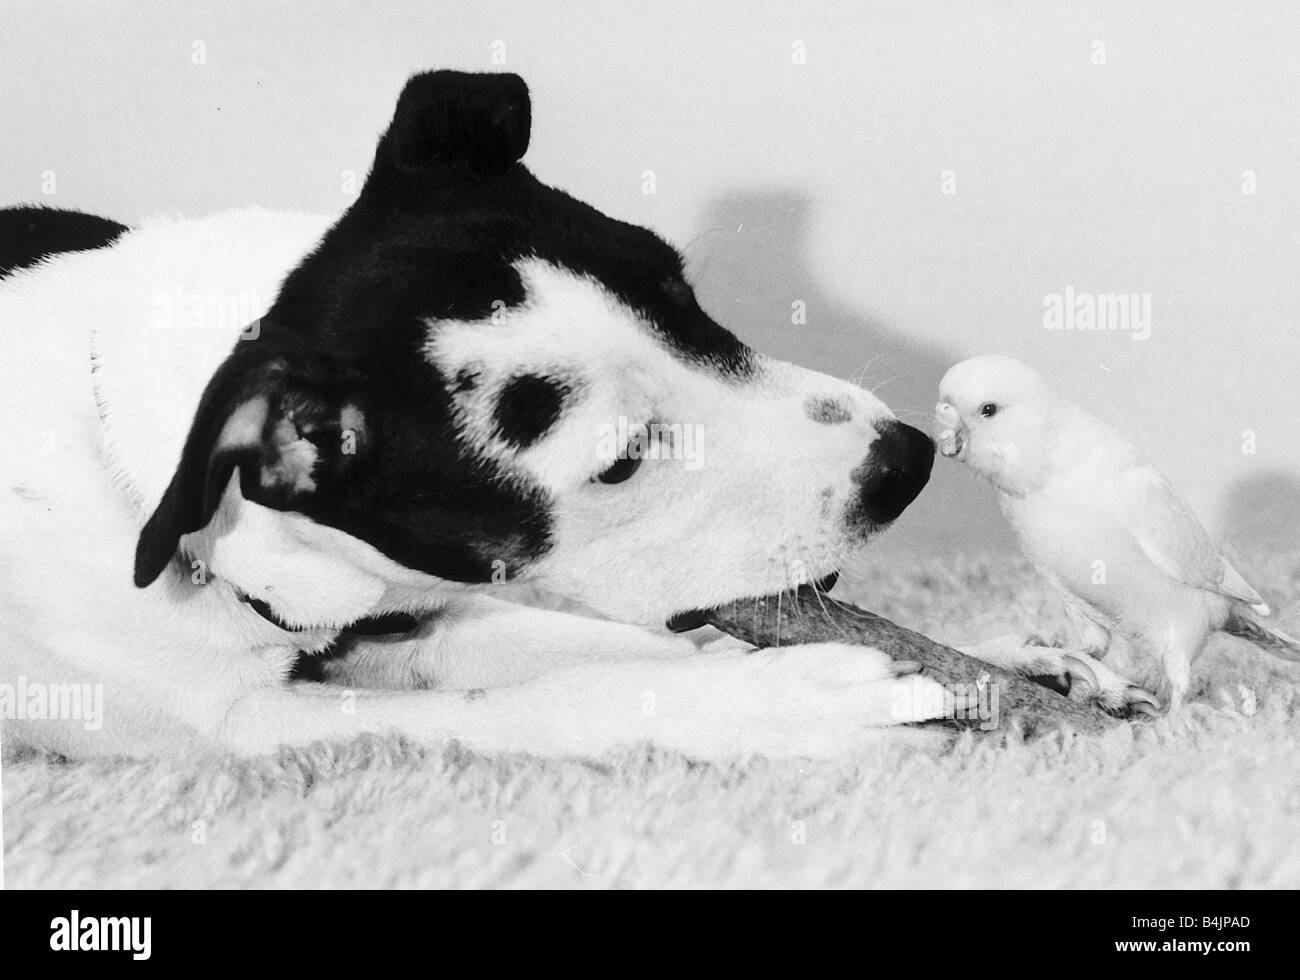 Joey the Budgie pecks nose of Jack Russell dog 1985 Stock Photo